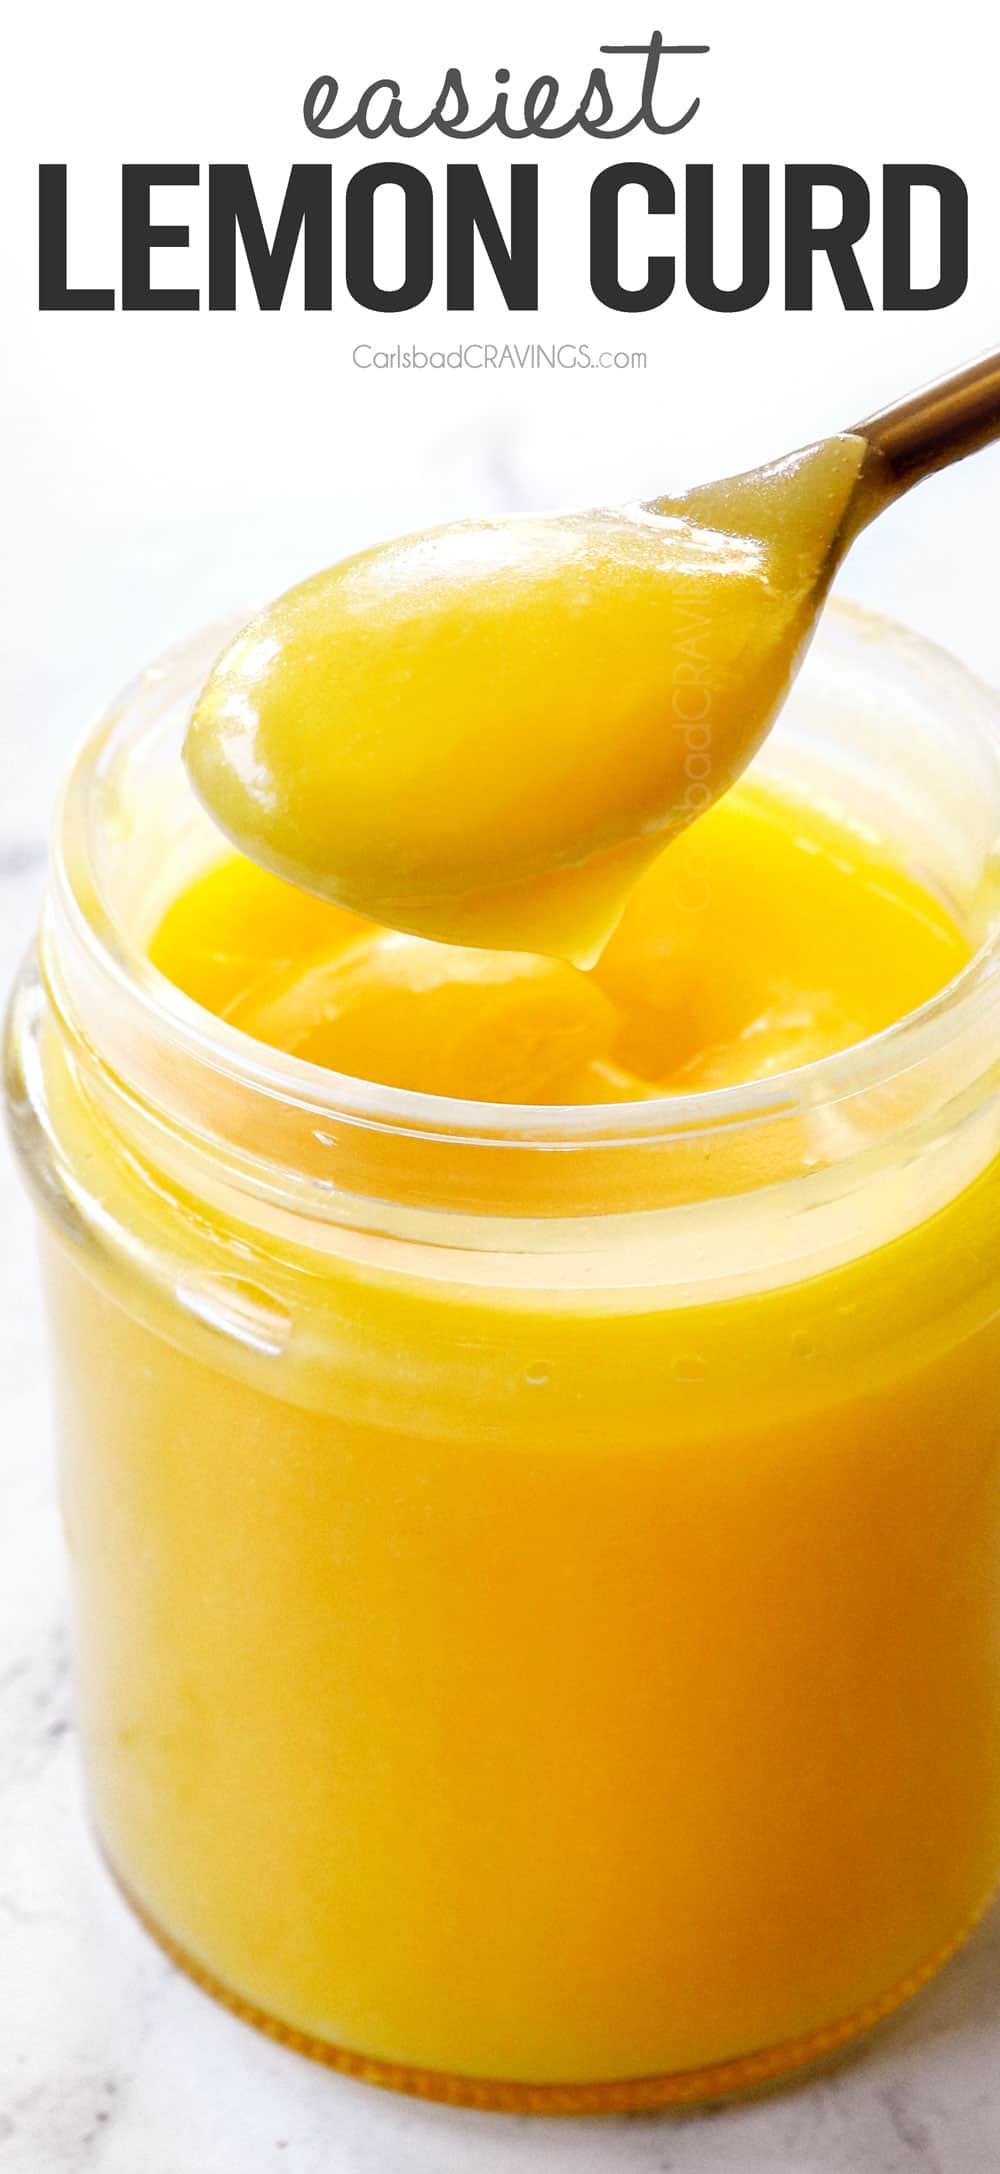 dipping a spoon into lemon curd showing how thick and creamy it is